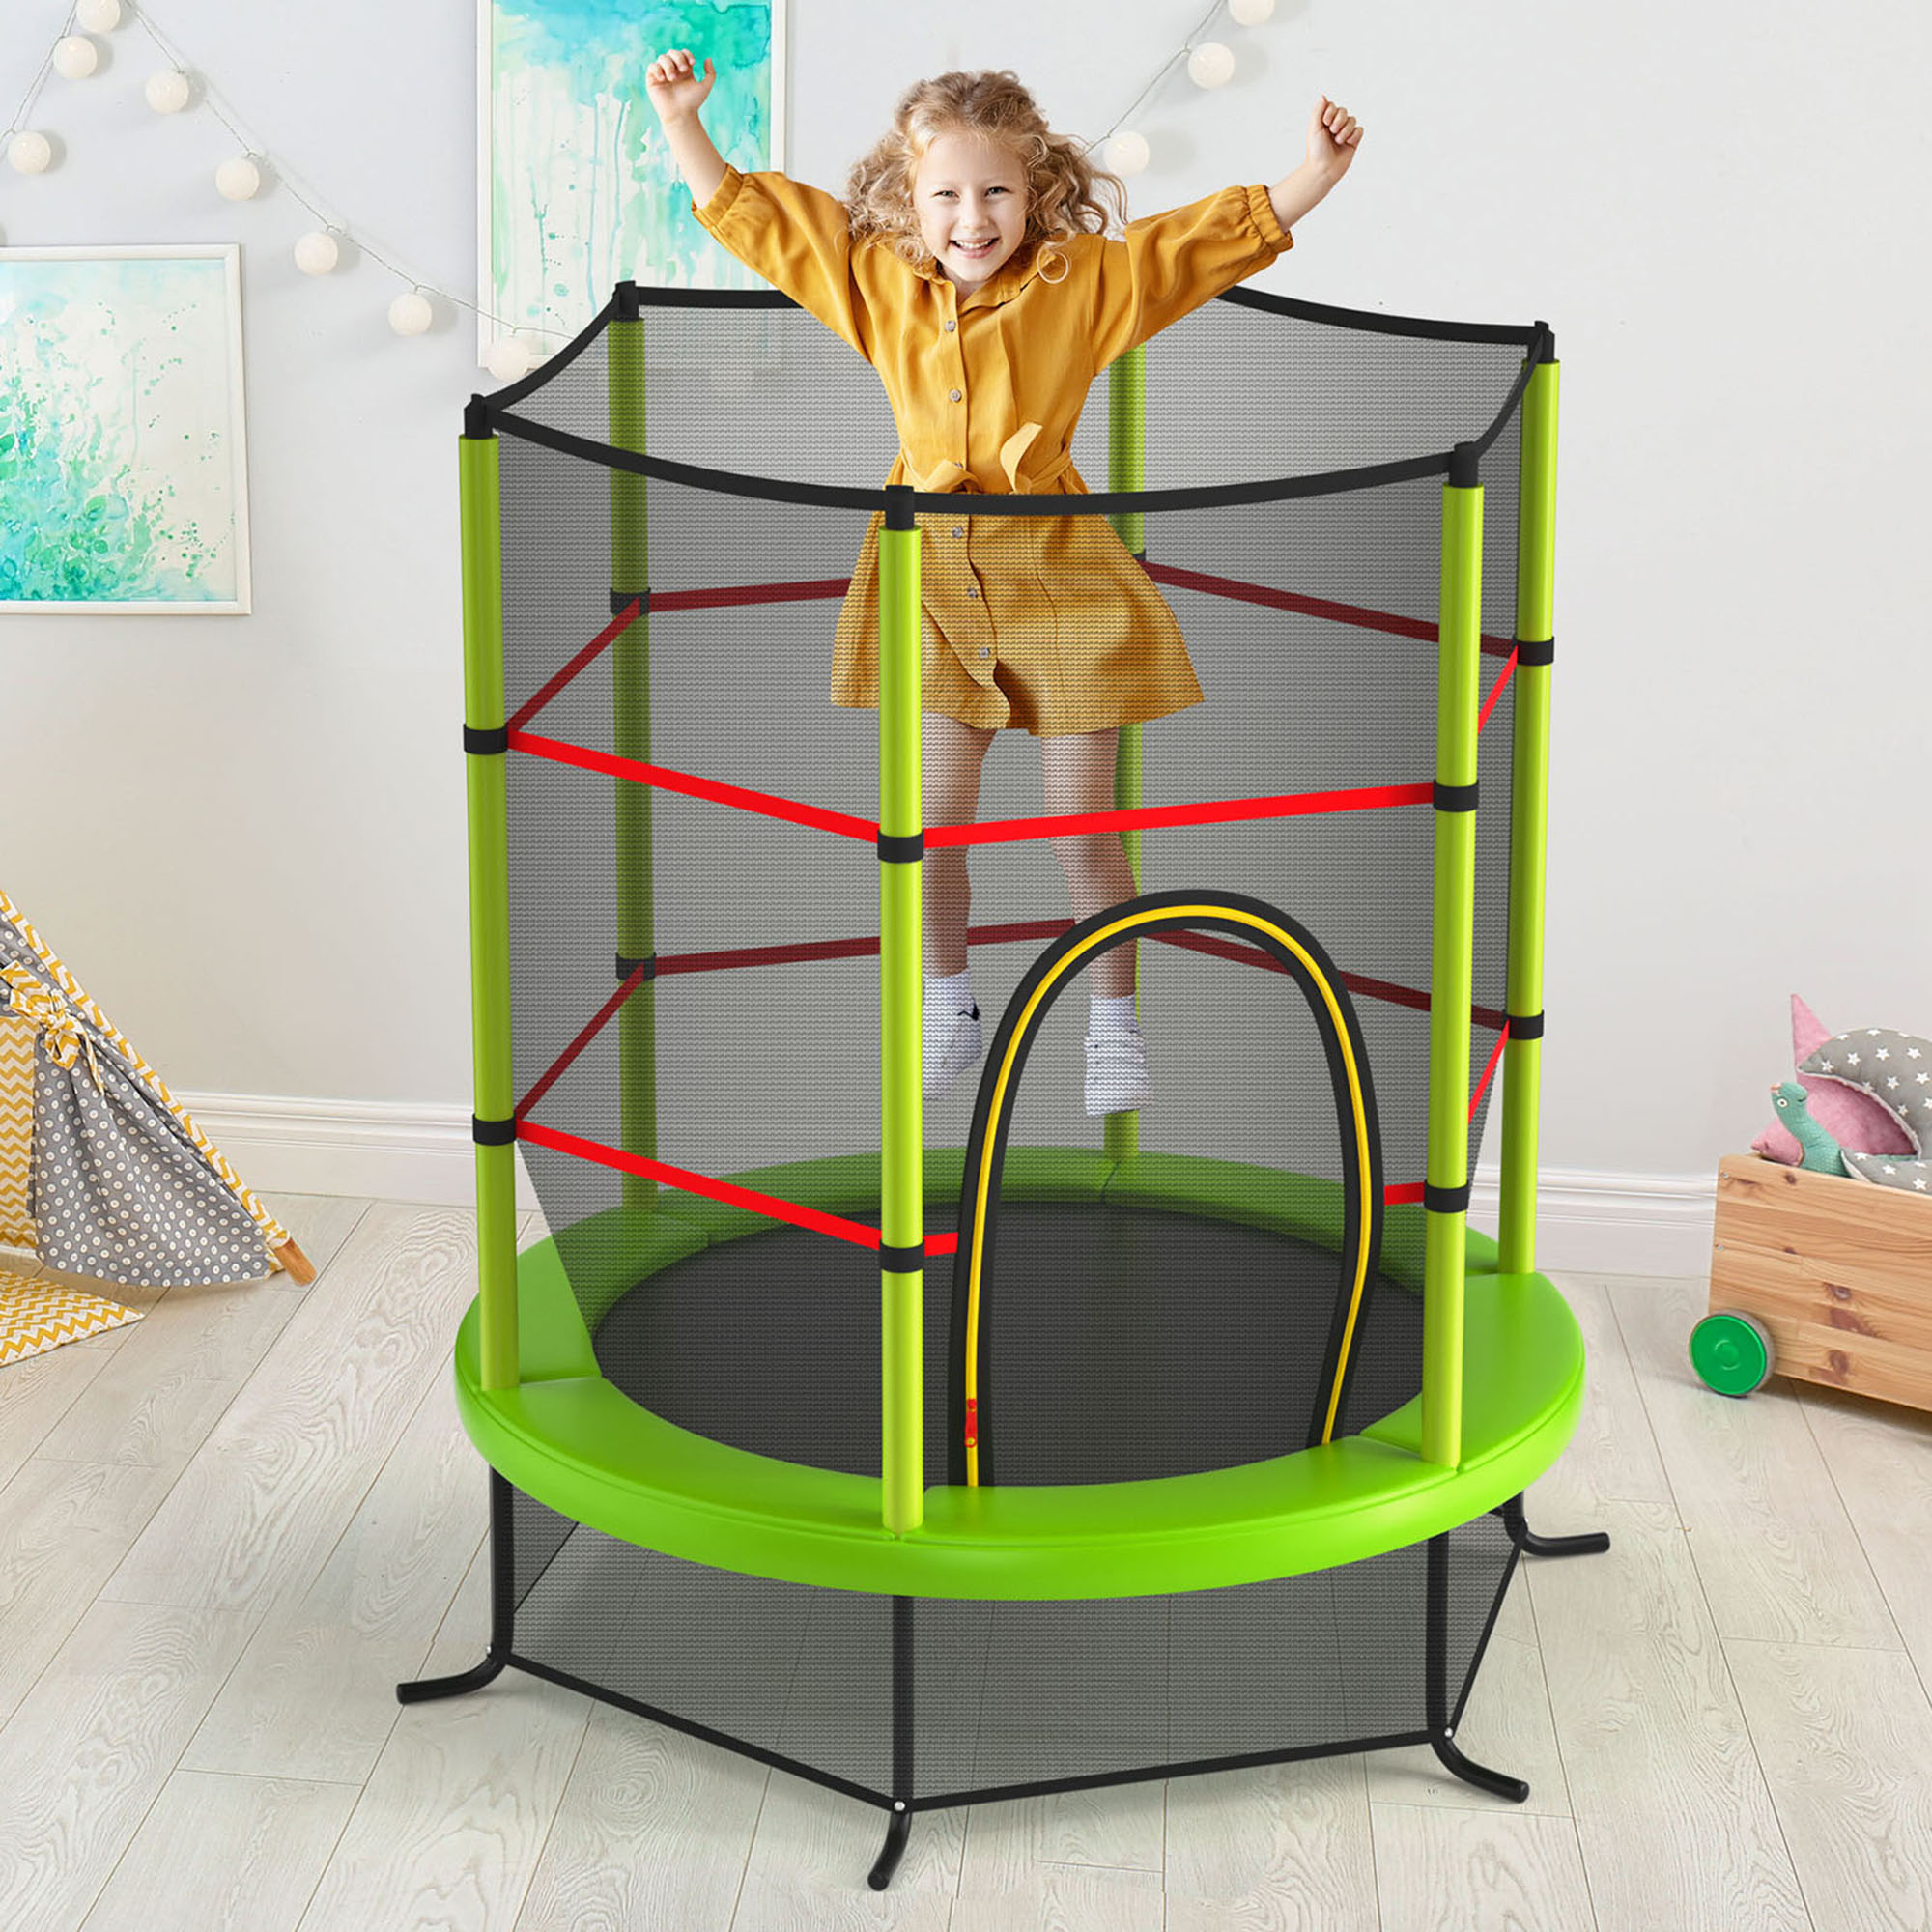 Gymax 55'' Recreational Trampoline for Kids Toddler Trampoline w/ Enclosure Net Green - image 4 of 10